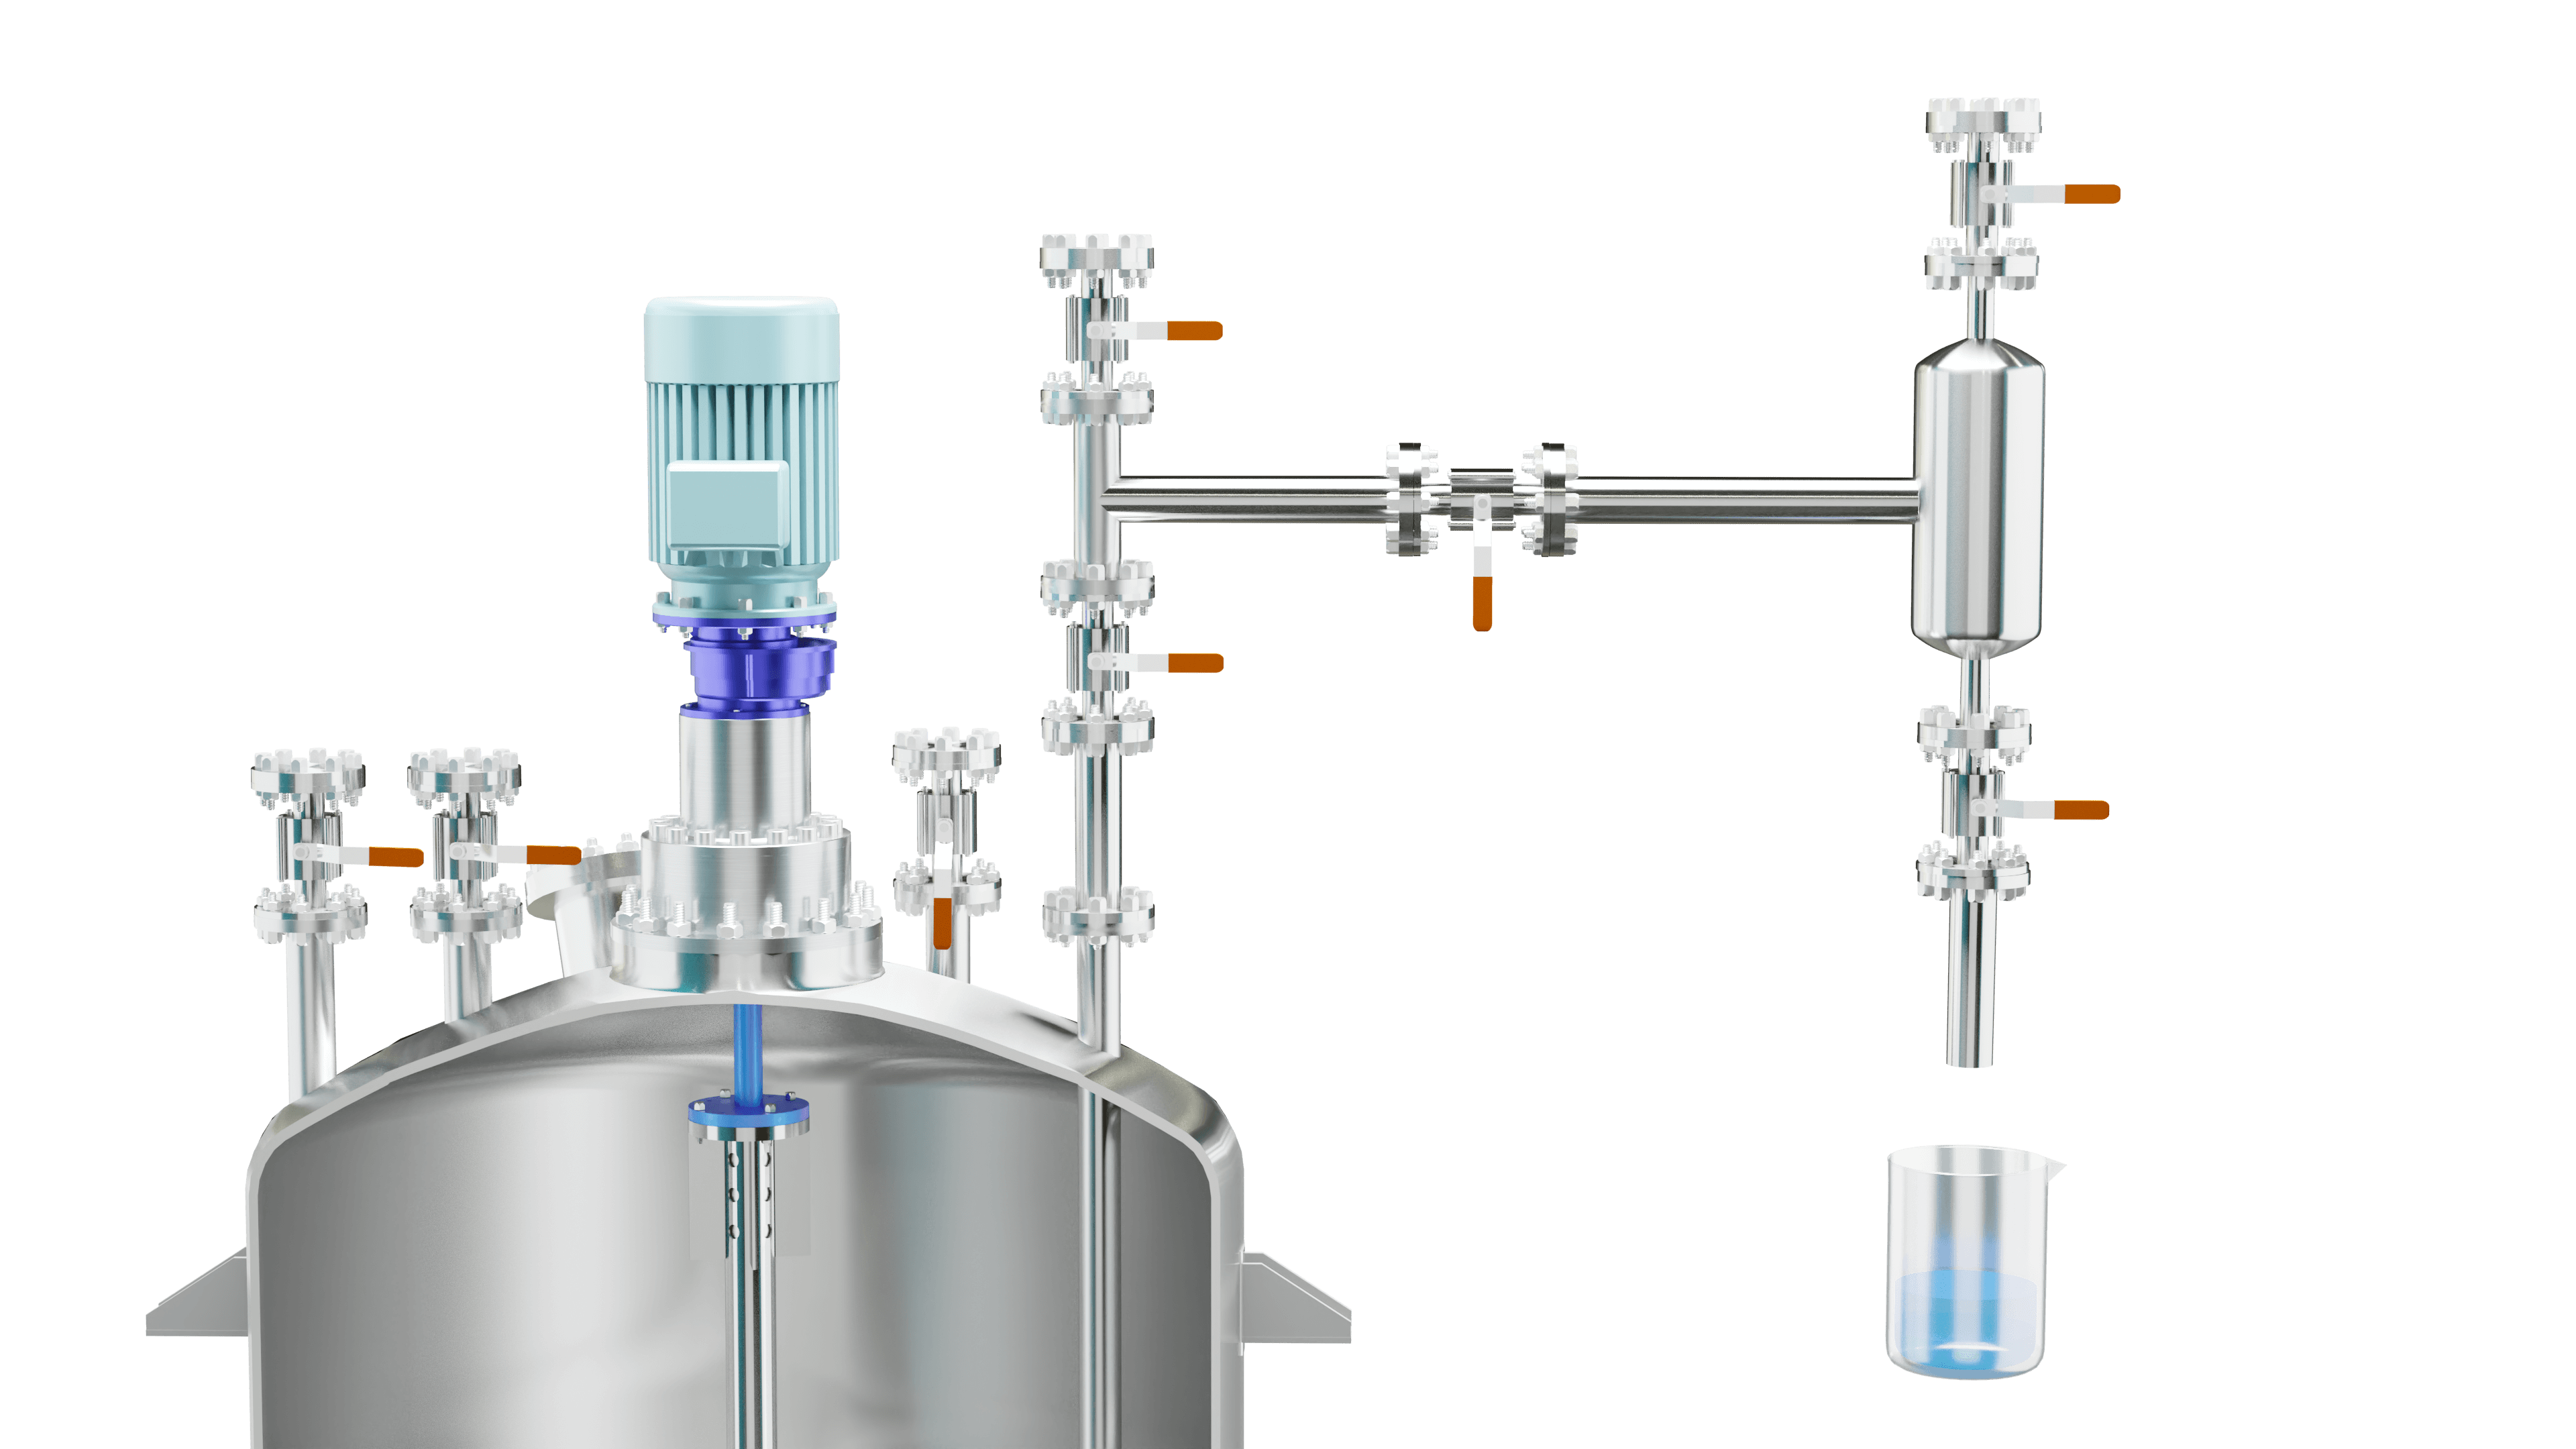 Online Sampling System, gas liquid reaction with suspension solid liquid gas, Jacketed Reactor with Magnetic Seal, Limpeted Reactor with Magnetic Seal and internal coils, Limpeted Reactor with Mechanical Seal, Limpeted Reactor with Magnetic Seal and Plate Coils, Fitted with sintered candles, catalyst filtration from the Autoclave, fire hazards in case of pyrophoric catalysts, Chemical reaction in viscous liquids and slurries, Omega-Kemix Gas-Induction Reactors, Pressure Reactions, Hydrogenation, Amination, Filter Candles are fitted with an inner Siphon Tube, CATALYST FILTER FOR HYDROGENATOR AND AUTOCLAVE